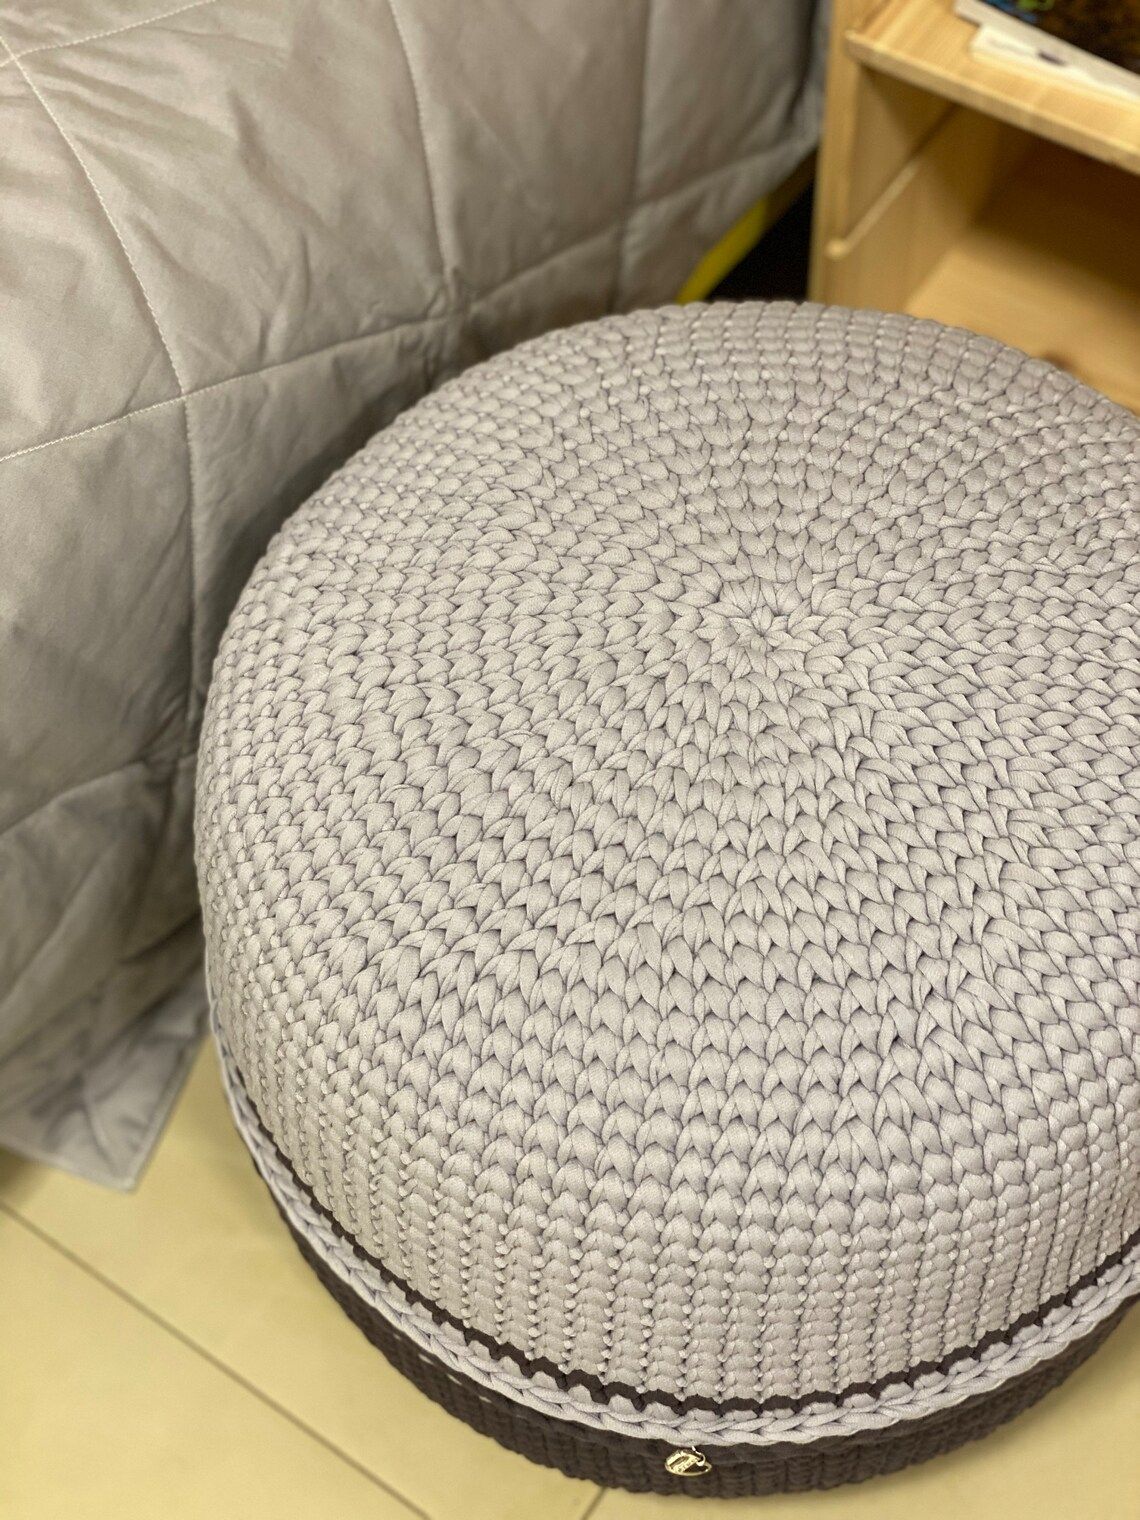 Knitted Cotton Soft Gray Ottoman For Extra Seating And Fun | Etsy Within Charcoal And Light Gray Cotton Pouf Ottomans (View 10 of 20)